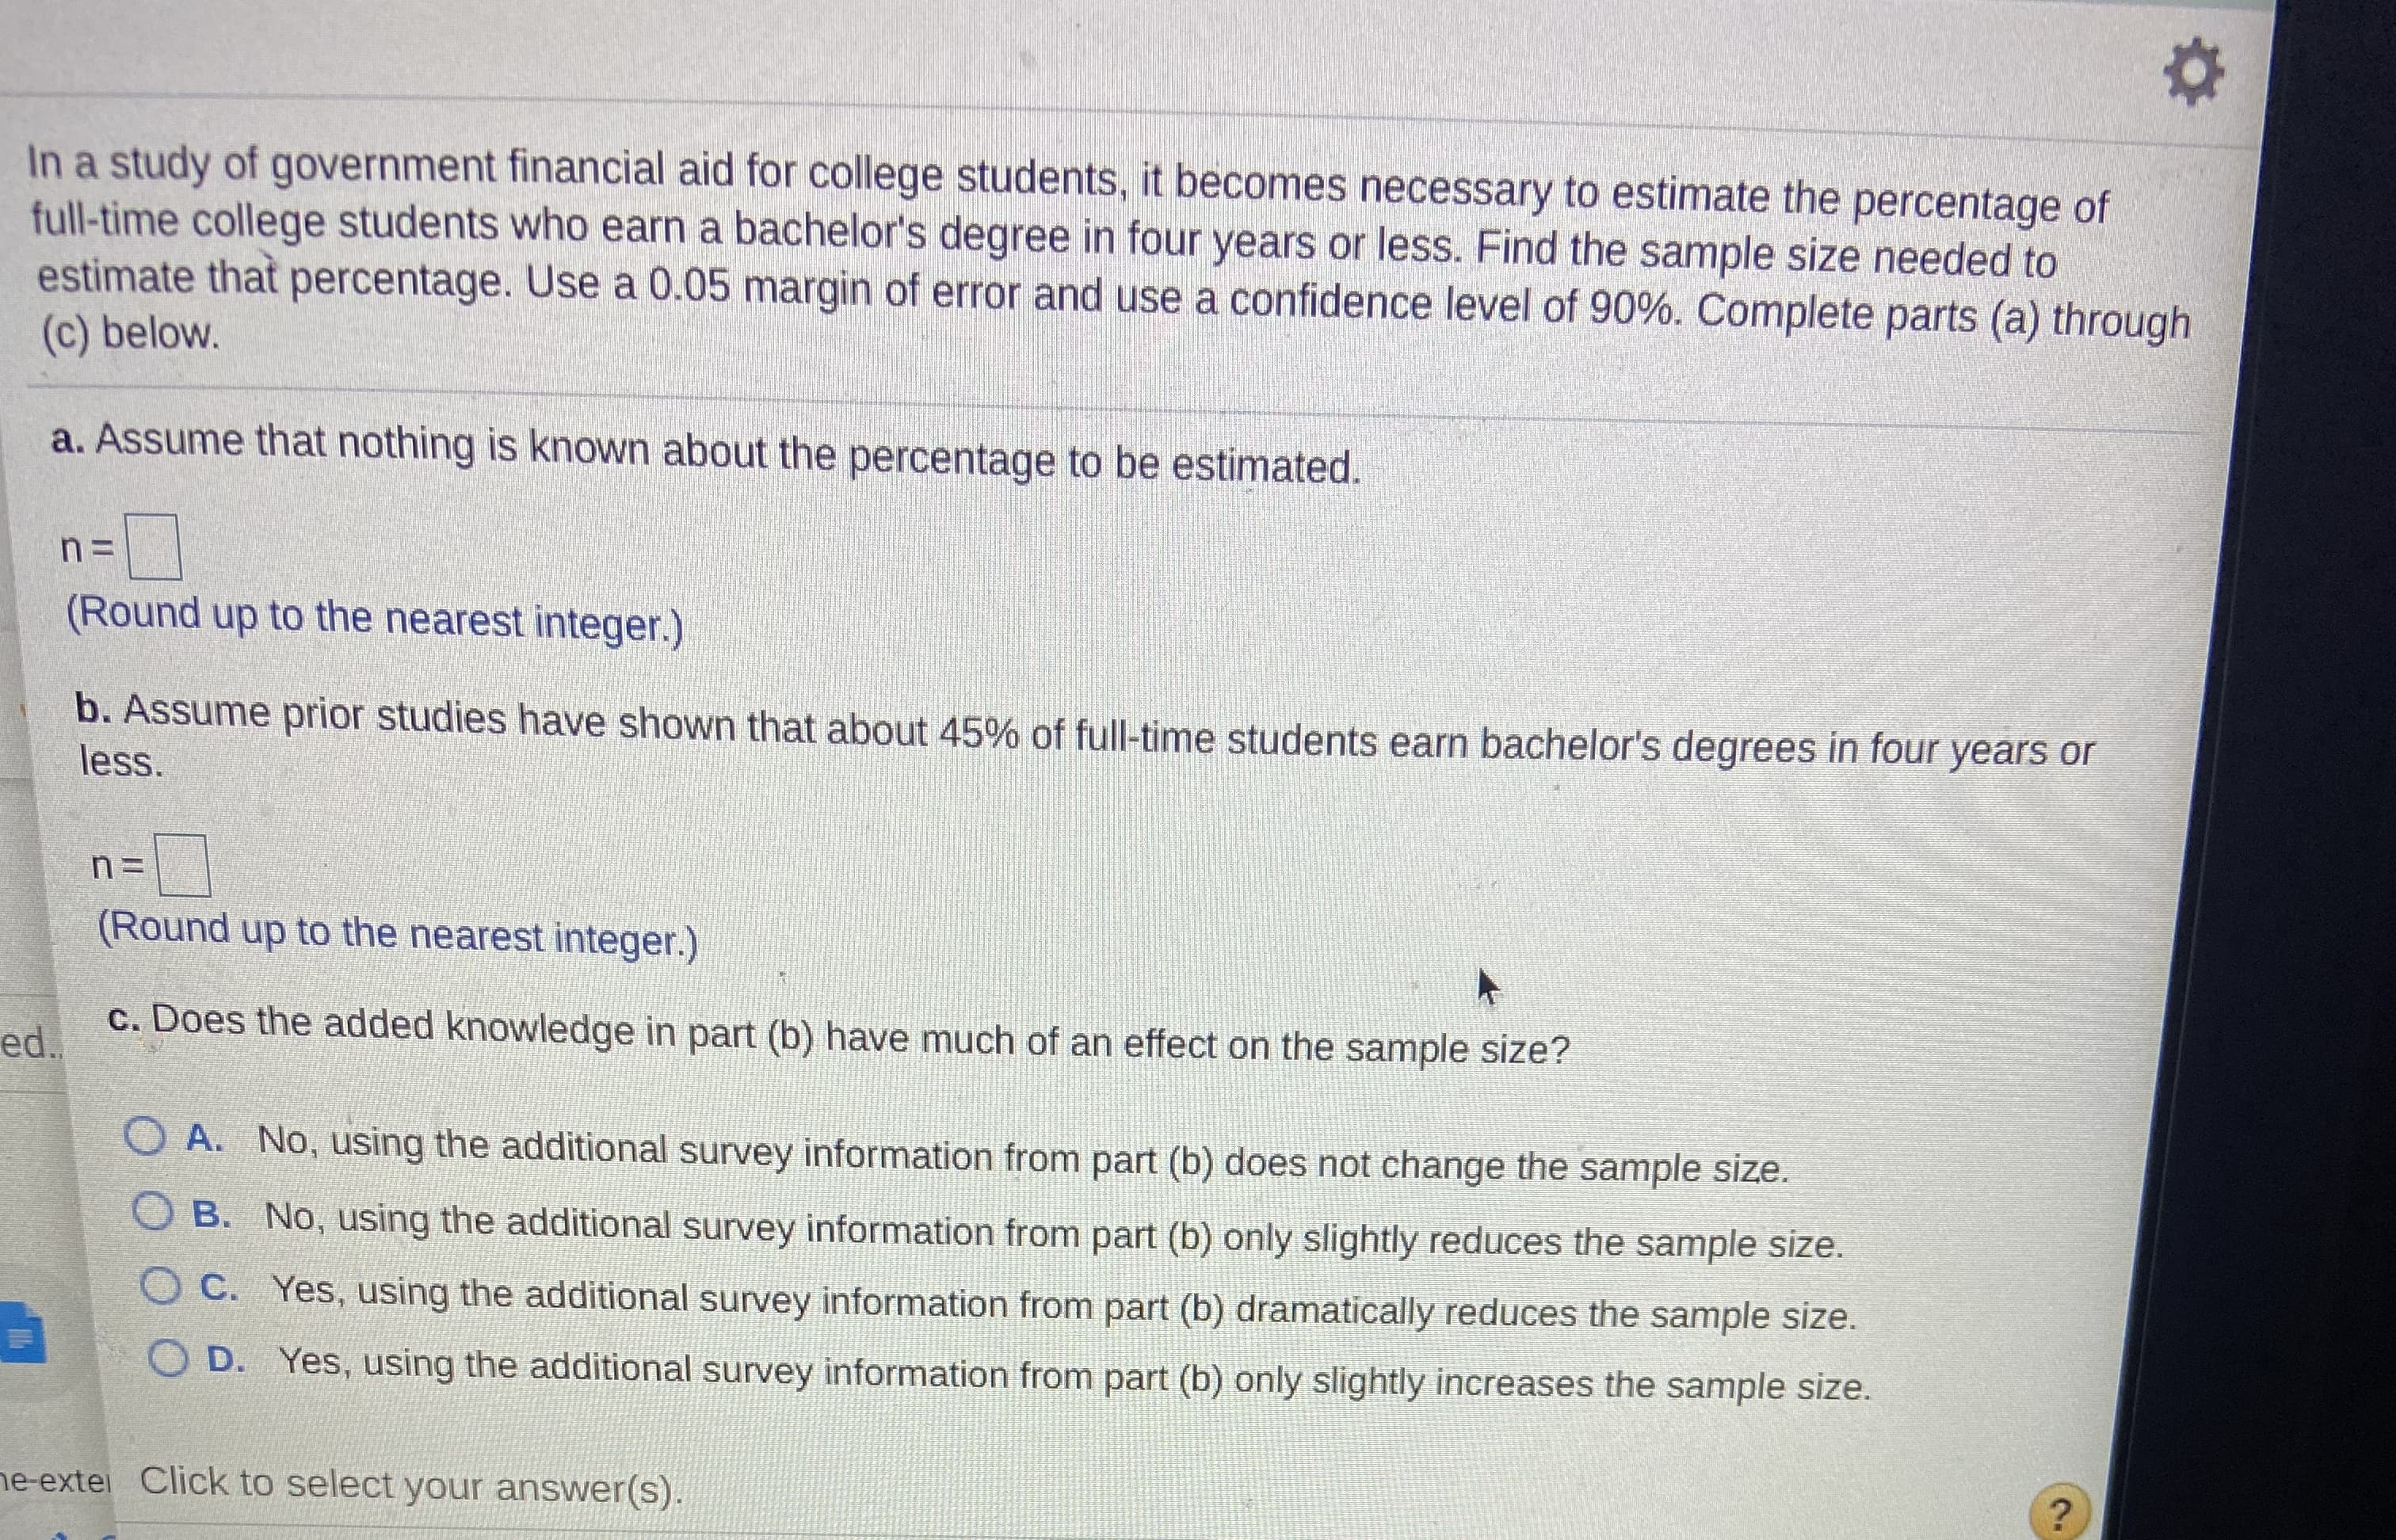 In a study of government financial aid for college students, it becomes necessary to estimate the percentage of
full-time college students who earn a bachelor's degree in four years or less. Find the sample size needed to
estimate that percentage. Use a 0.05 margin of error and use a confidence level of 90%. Complete parts (a) through
(c) below.
a. Assume that nothing is known about the percentage to be estimated.
%3=
(Round up to the nearest integer.)
b. Assume prior studies have shown that about 45% of full-time students earn bachelor's degrees in four years or
less.
(Round up to the nearest integer.)
c. Does the added knowledge in part (b) have much of an effect on the sample size?
ed.
A. No, using the additional survey information from part (b) does not change the sample size.
B. No, using the additional survey information from part (b) only slightly reduces the sample size.
O C. Yes, using the additional survey information from part (b) dramatically reduces the sample size.
O D. Yes, using the additional survey information from part (b) only slightly increases the sample size.
ne-extel Click to select your answer(s).
